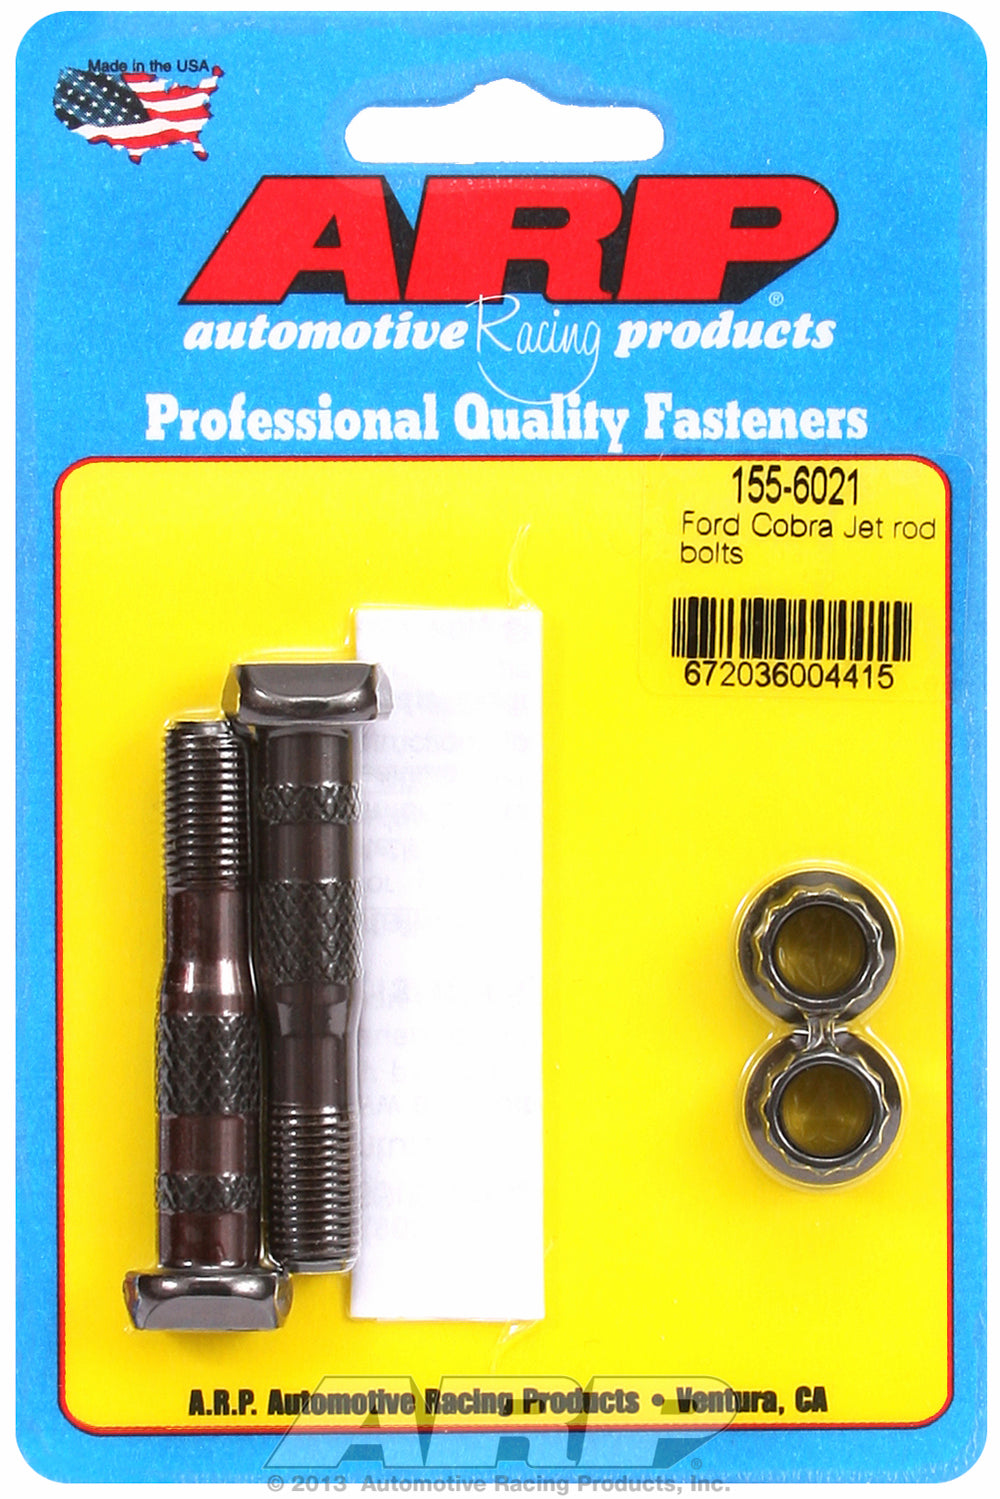 Hi-Perf 8740 (2-pc) Rod Bolt Kit for Ford 428 Cobra Jet (replacement for 13/32˝ bolt)